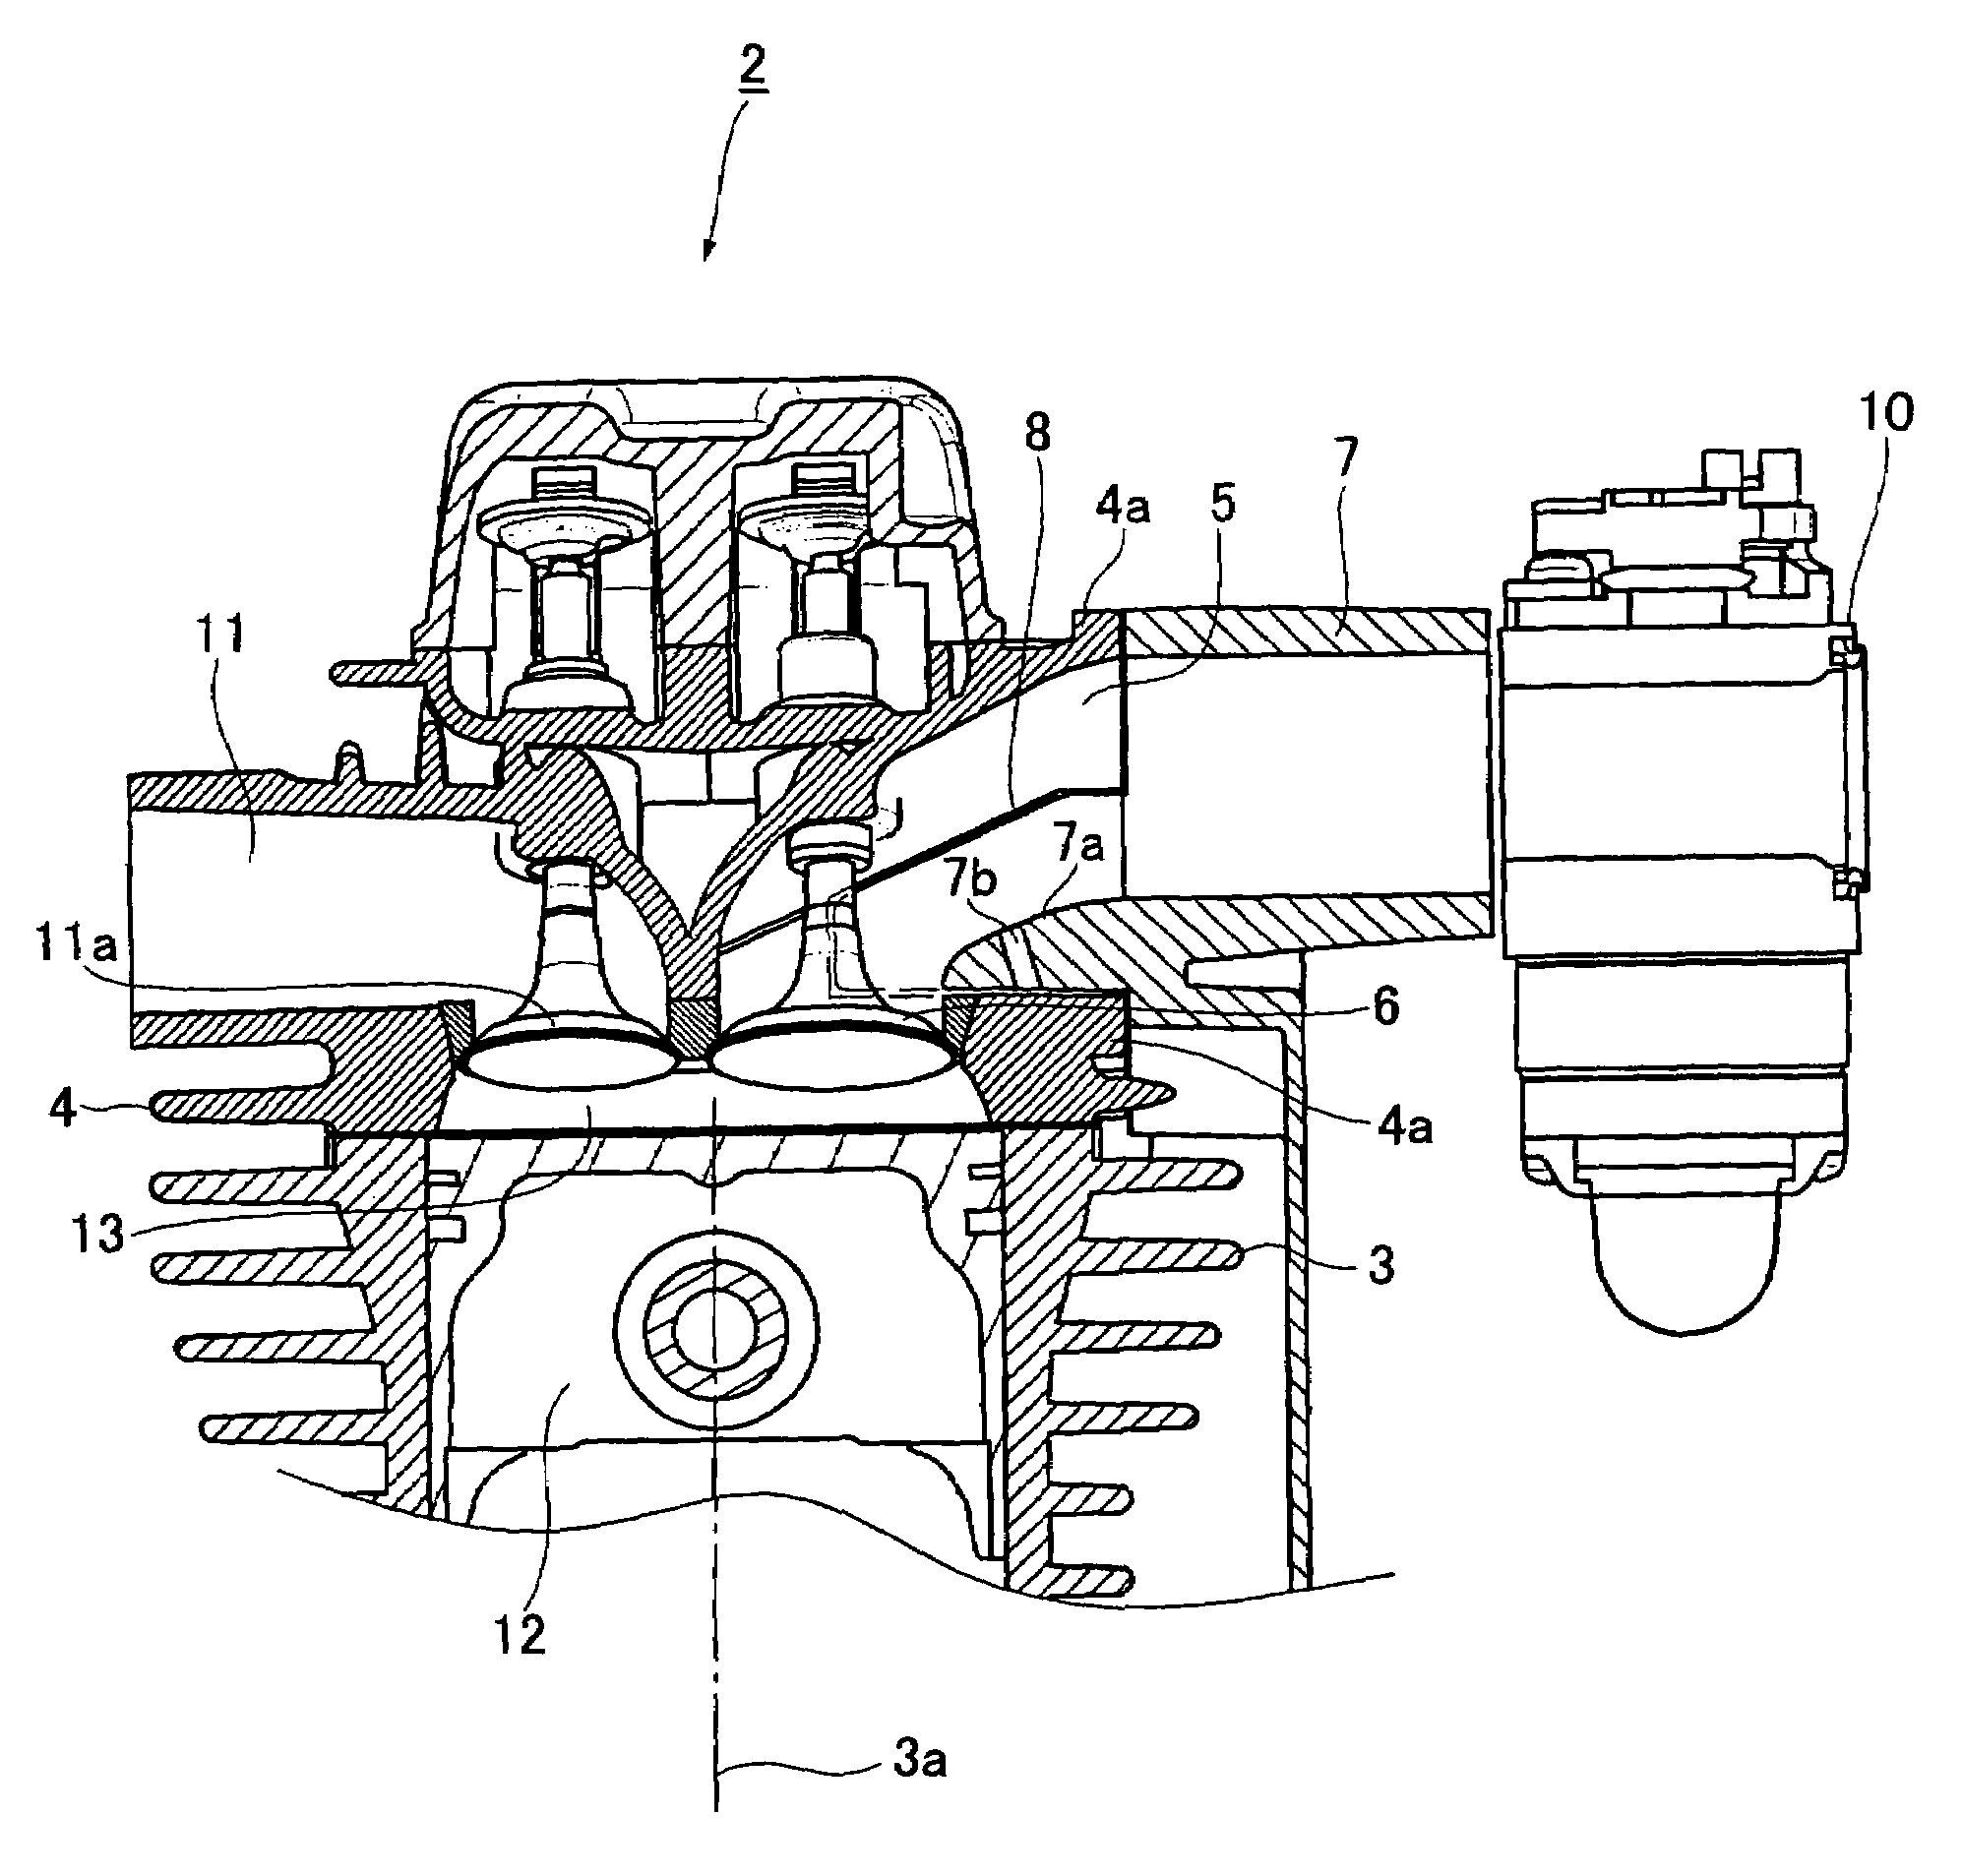 Intake port for 4-cycle engine